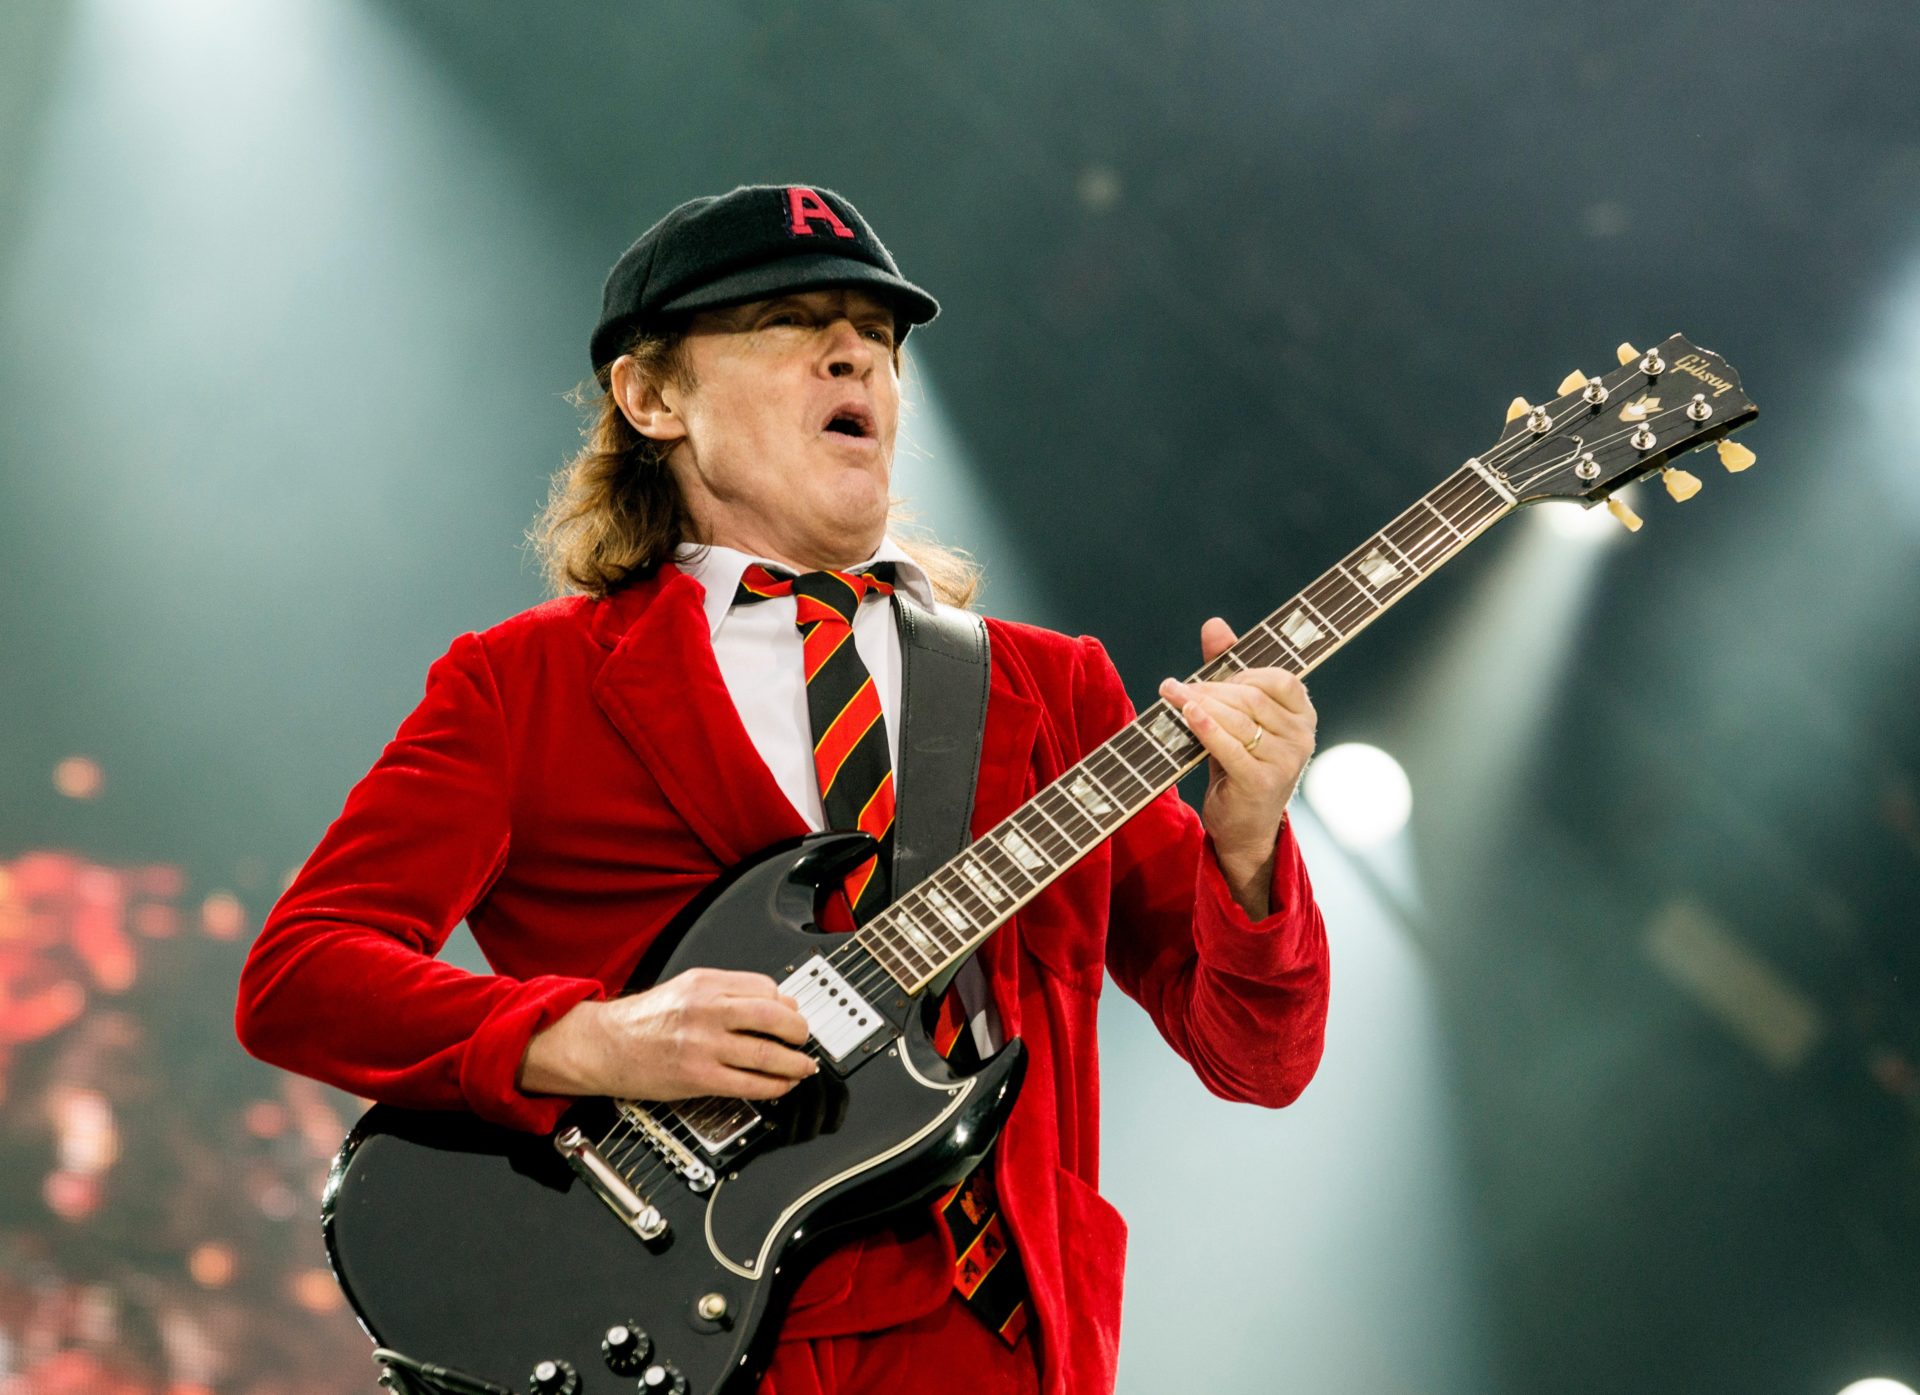 Musician Angus Young of AC/DC performs in Glasgow, Scotland, 18-9-15.